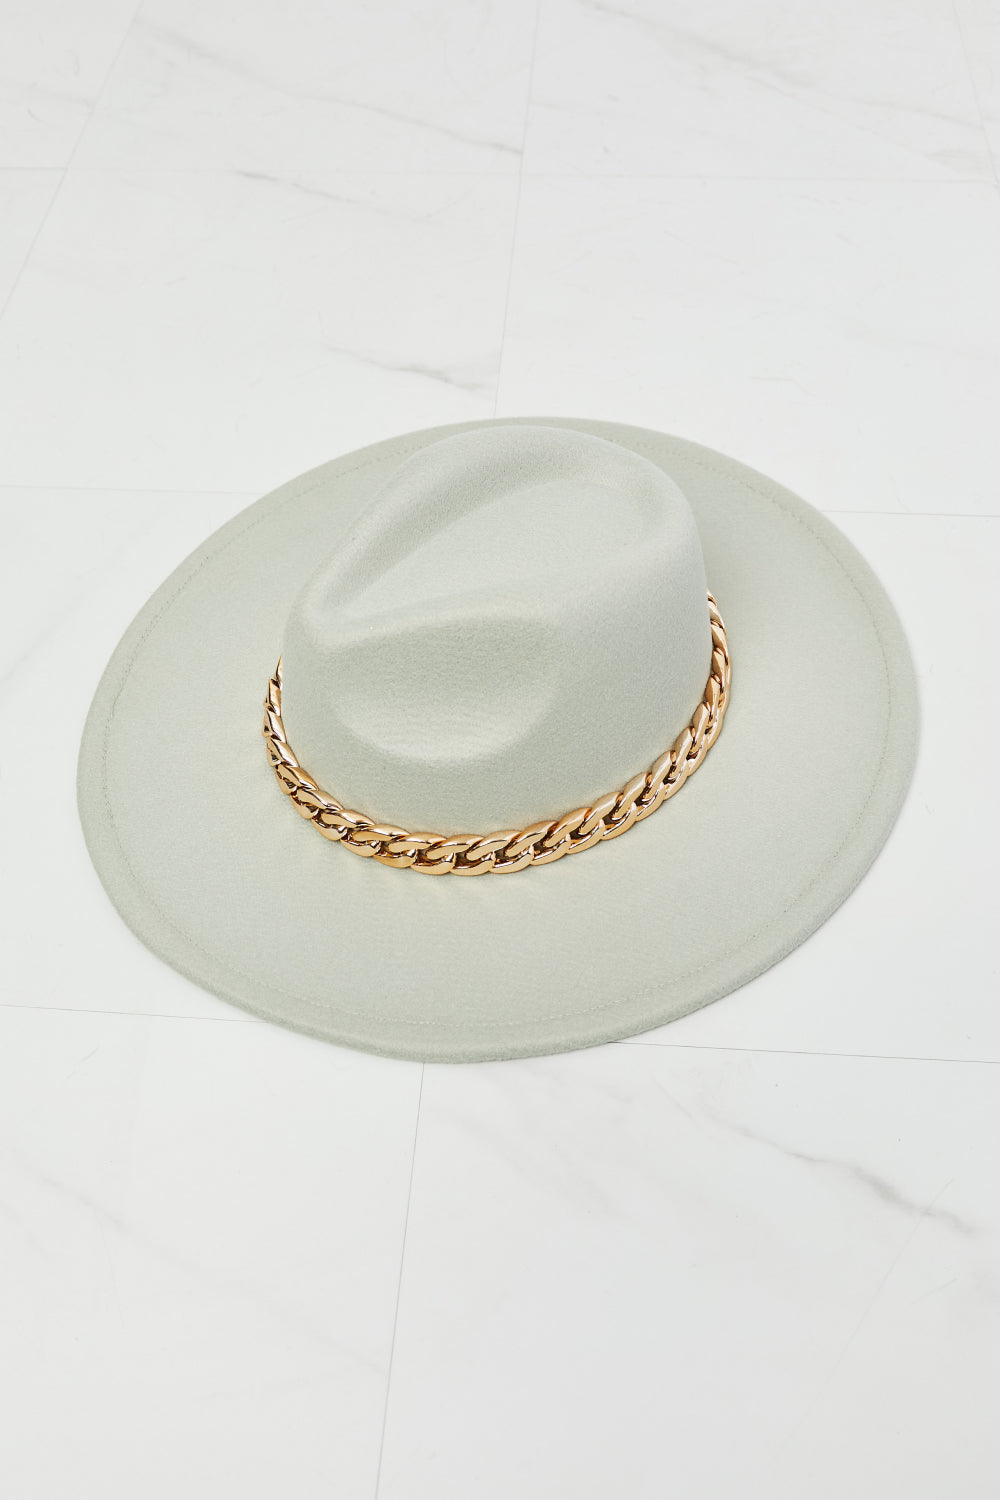 Fame Keep Your Promise Fedora Hat in Mint - Cheeky Chic Boutique